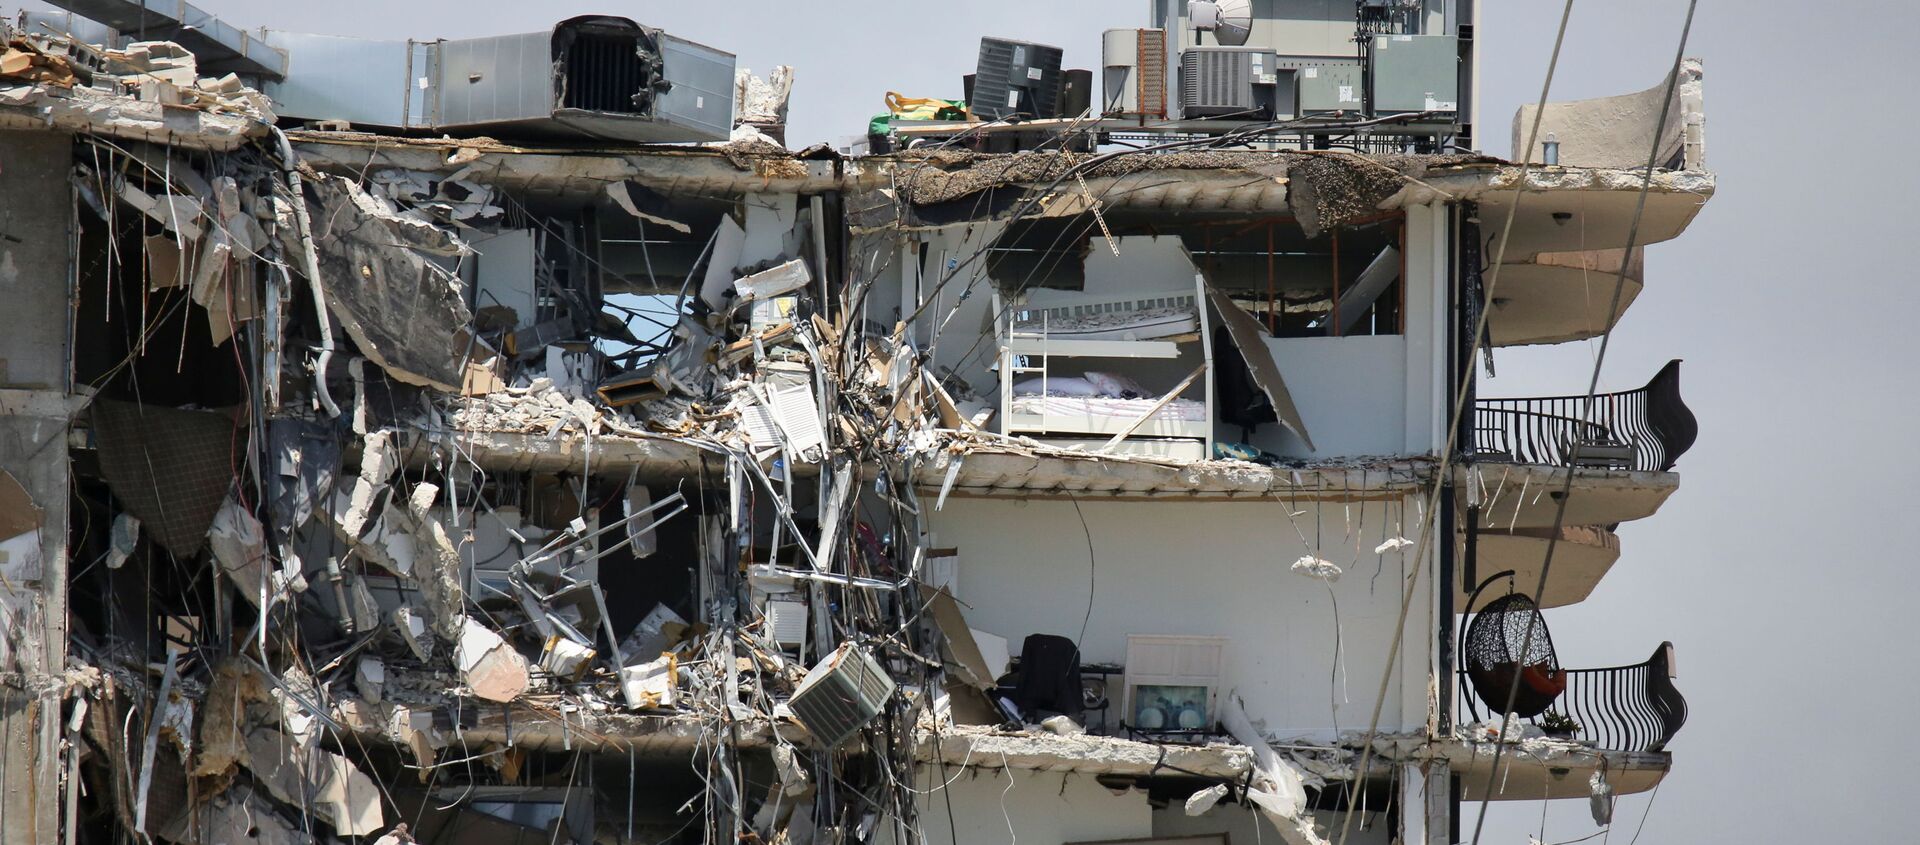 A view of a partially collapsed residential building as the emergency crews continue search and rescue operations for survivors, in Surfside, near Miami Beach, Florida, U.S. June 27, 2021 - Sputnik International, 1920, 28.06.2021